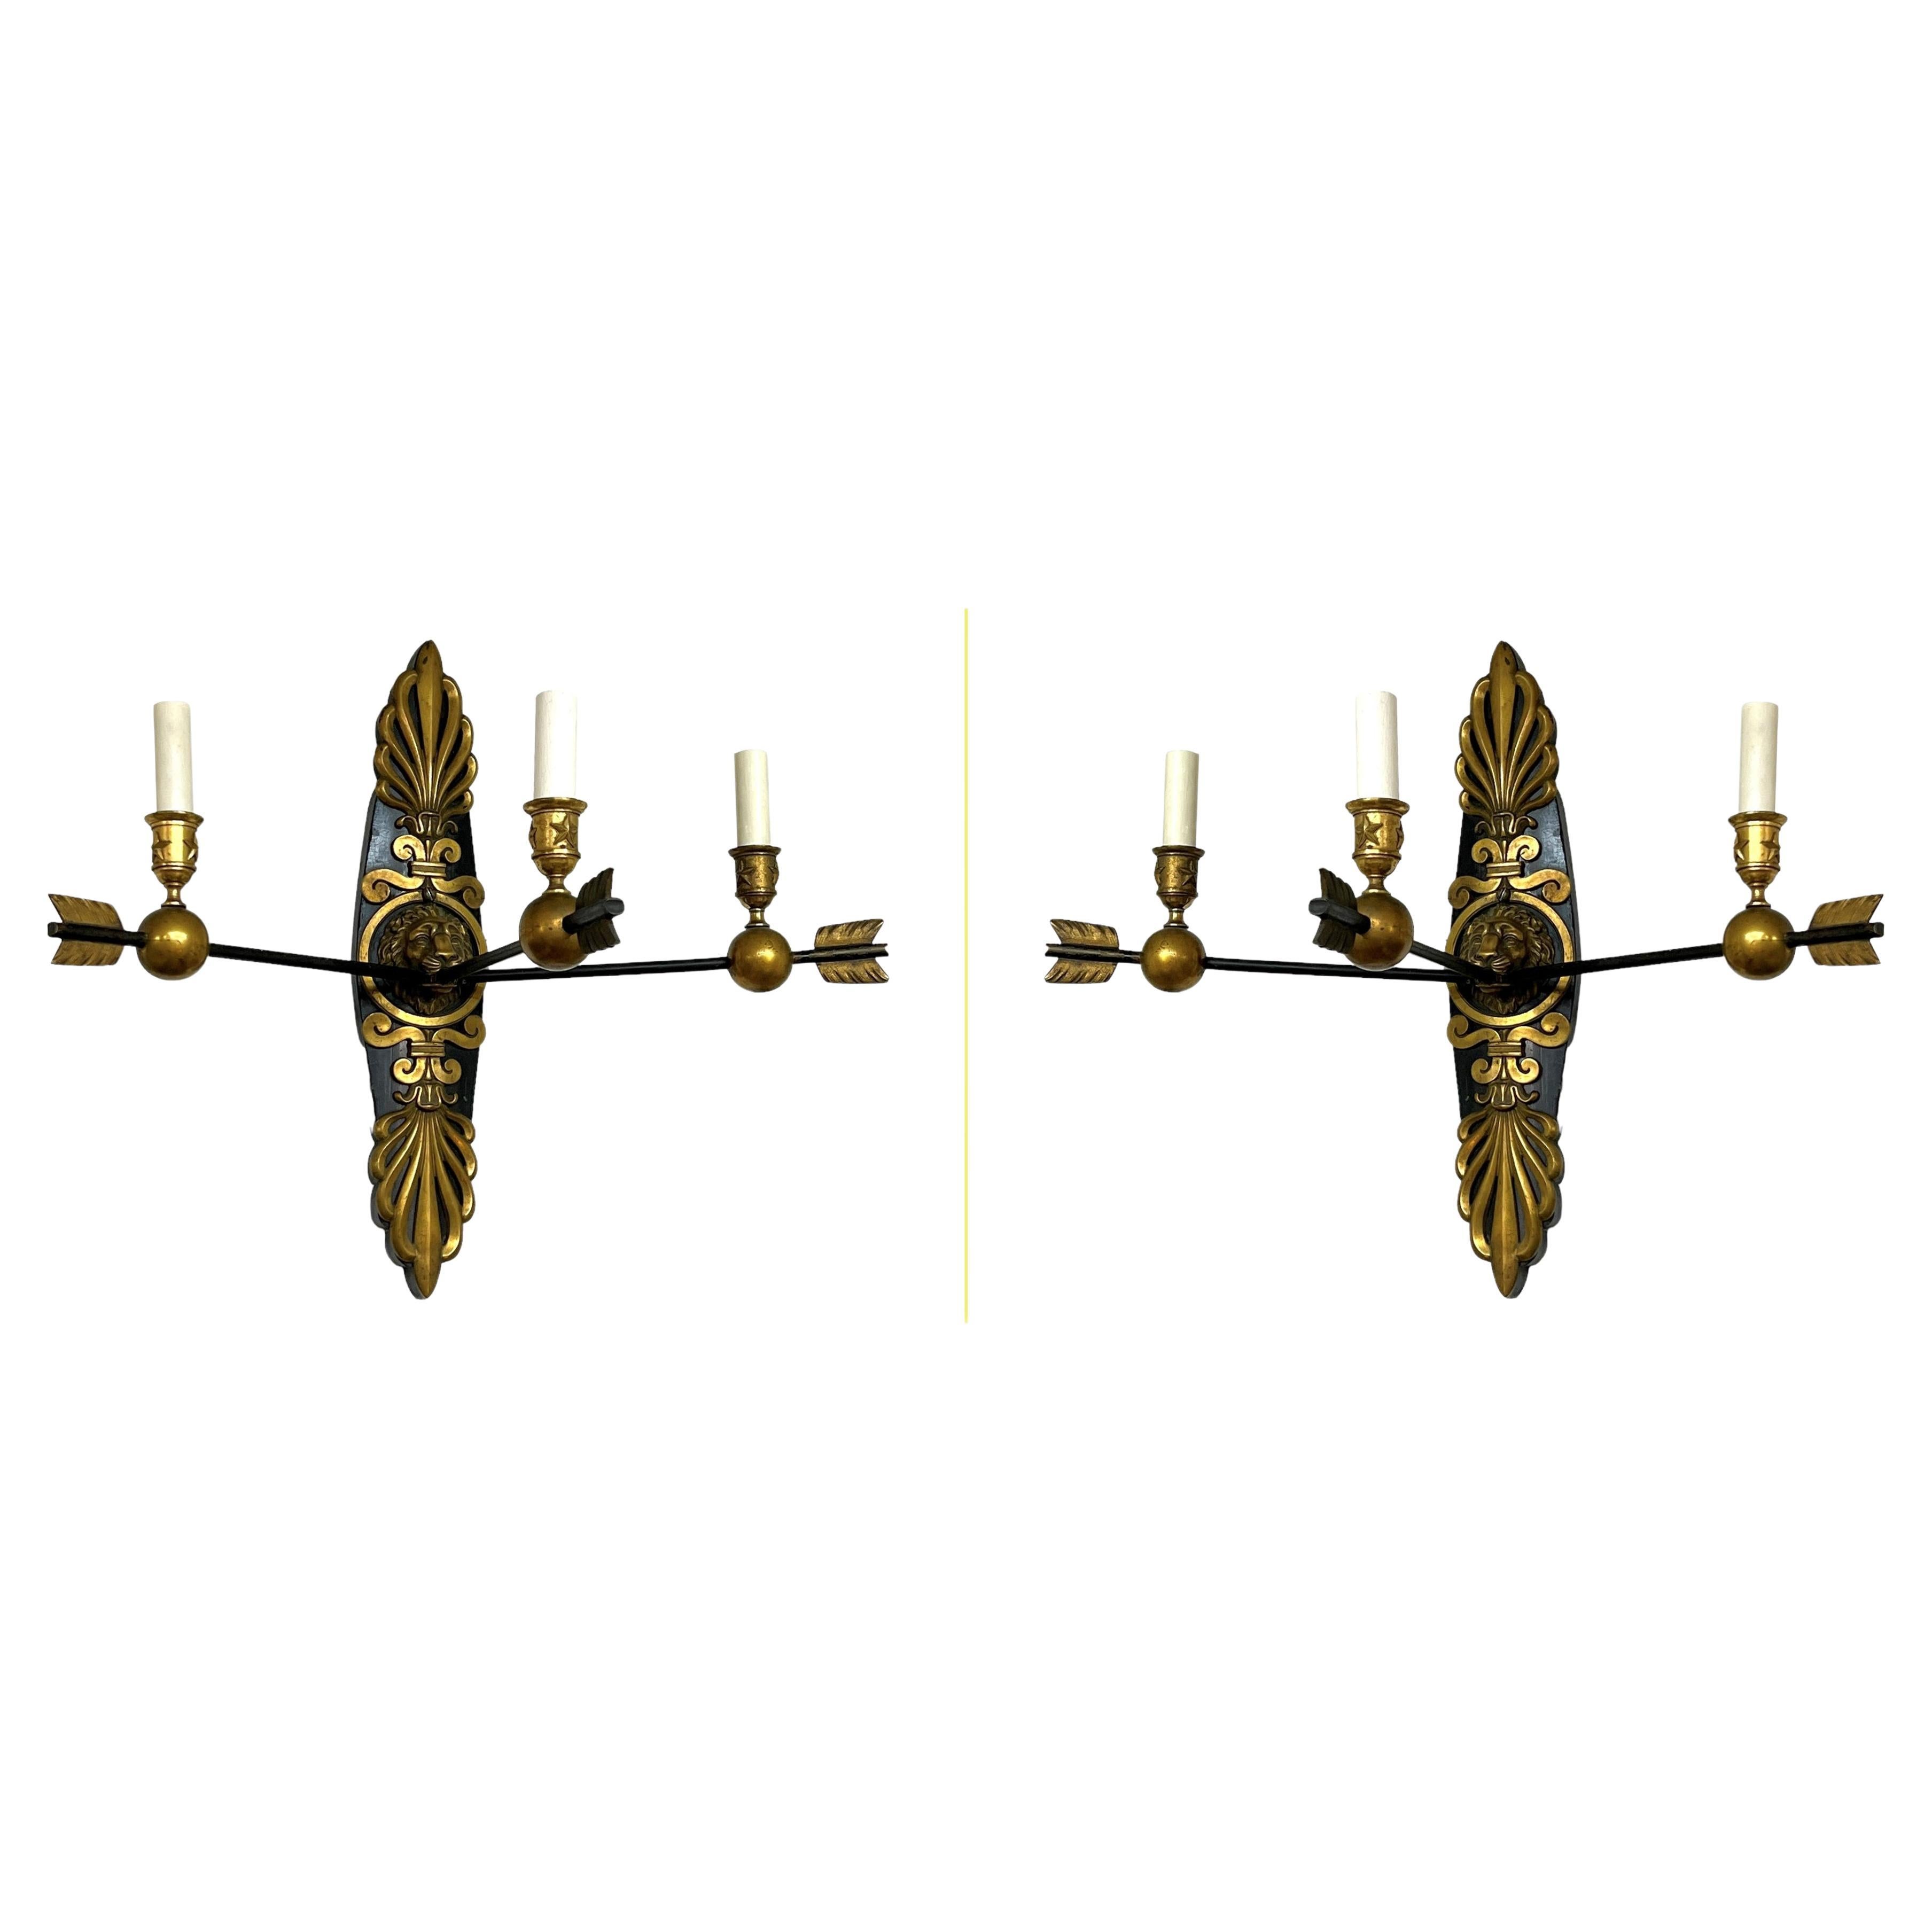 Pair Arrow Motif Sconces in French Empire Style